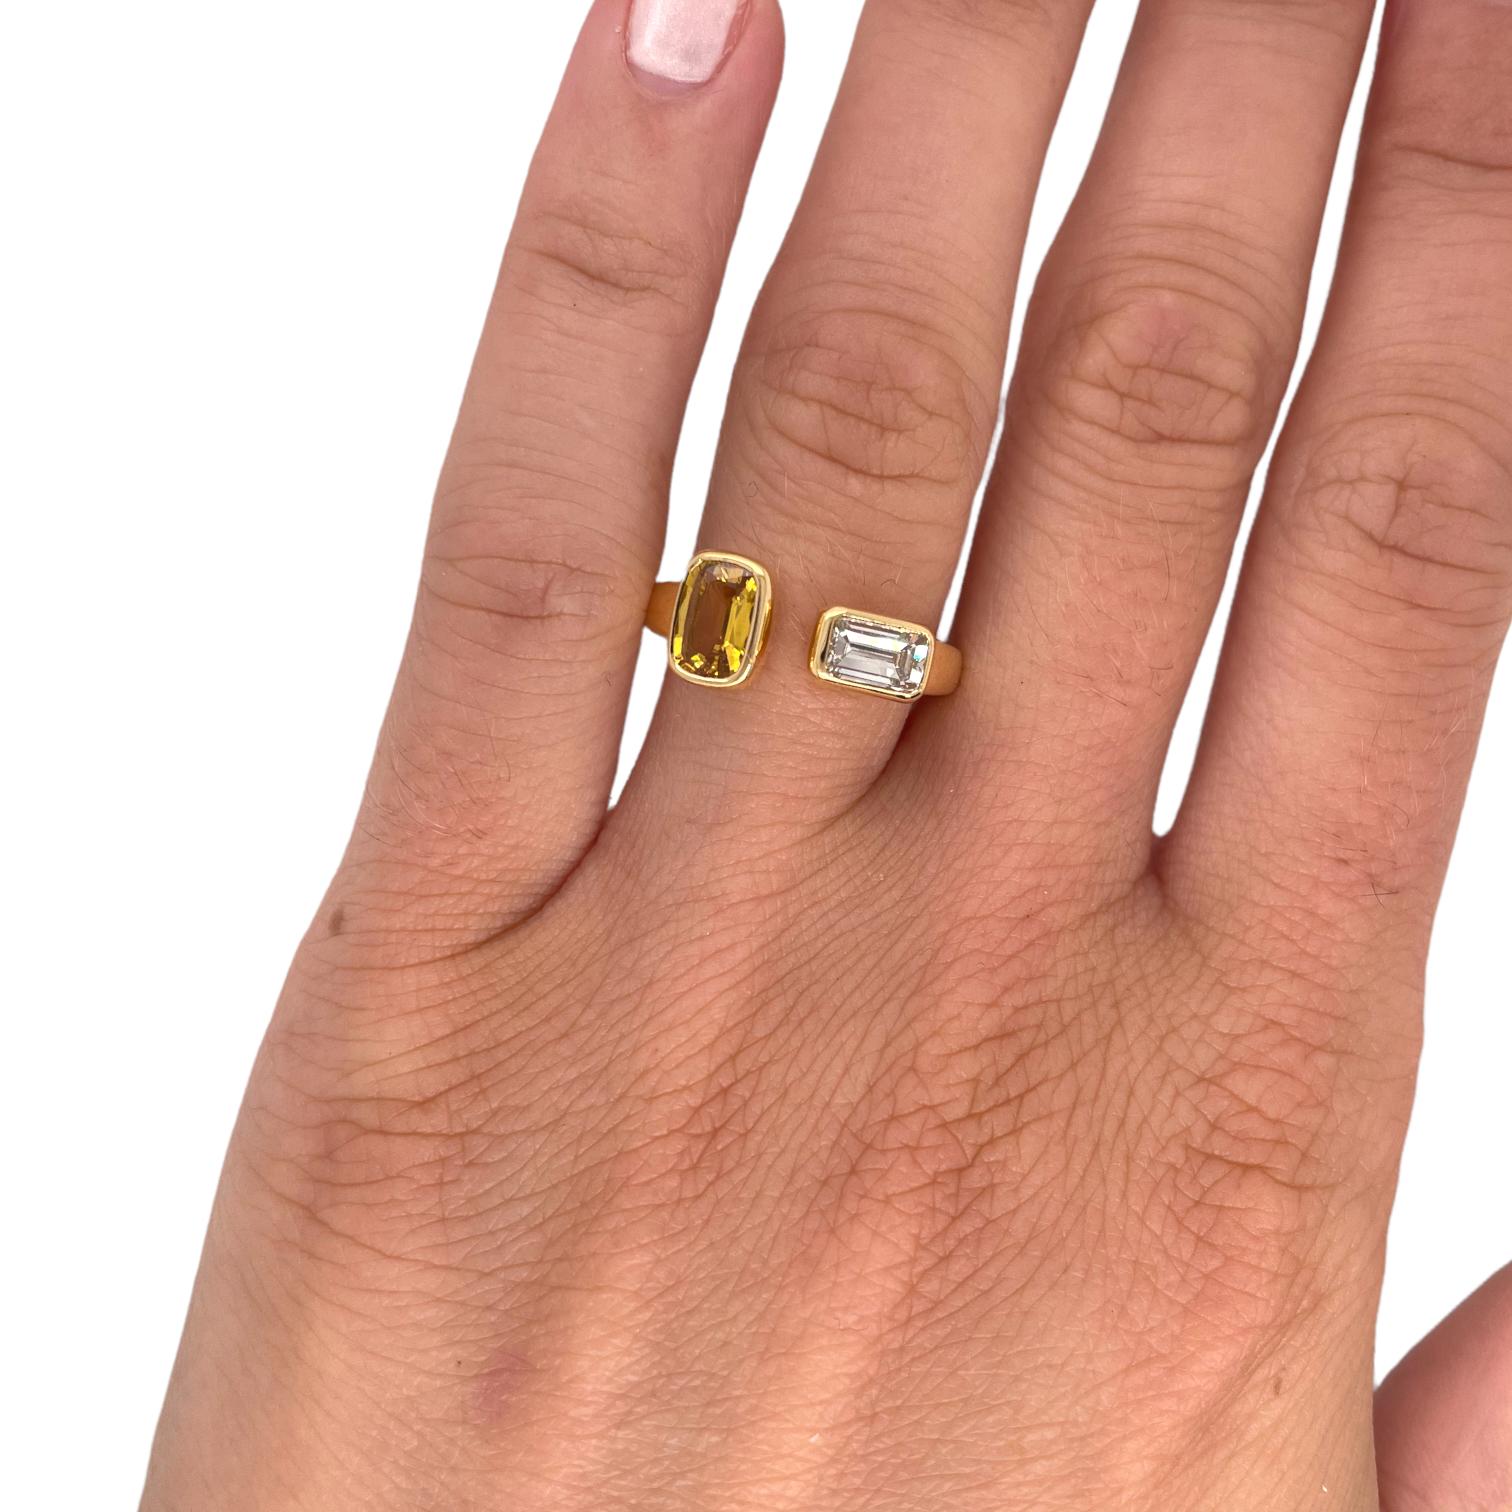 Ring contains one cushion cut yellow sapphire and one elongated emerald cut diamond, 
Emerald cut diamond is H in color and SI1 in clarity.  Stones are mounted in handmade bezel settings in a bypass style ring. Ring is a size 6 and can be resized to